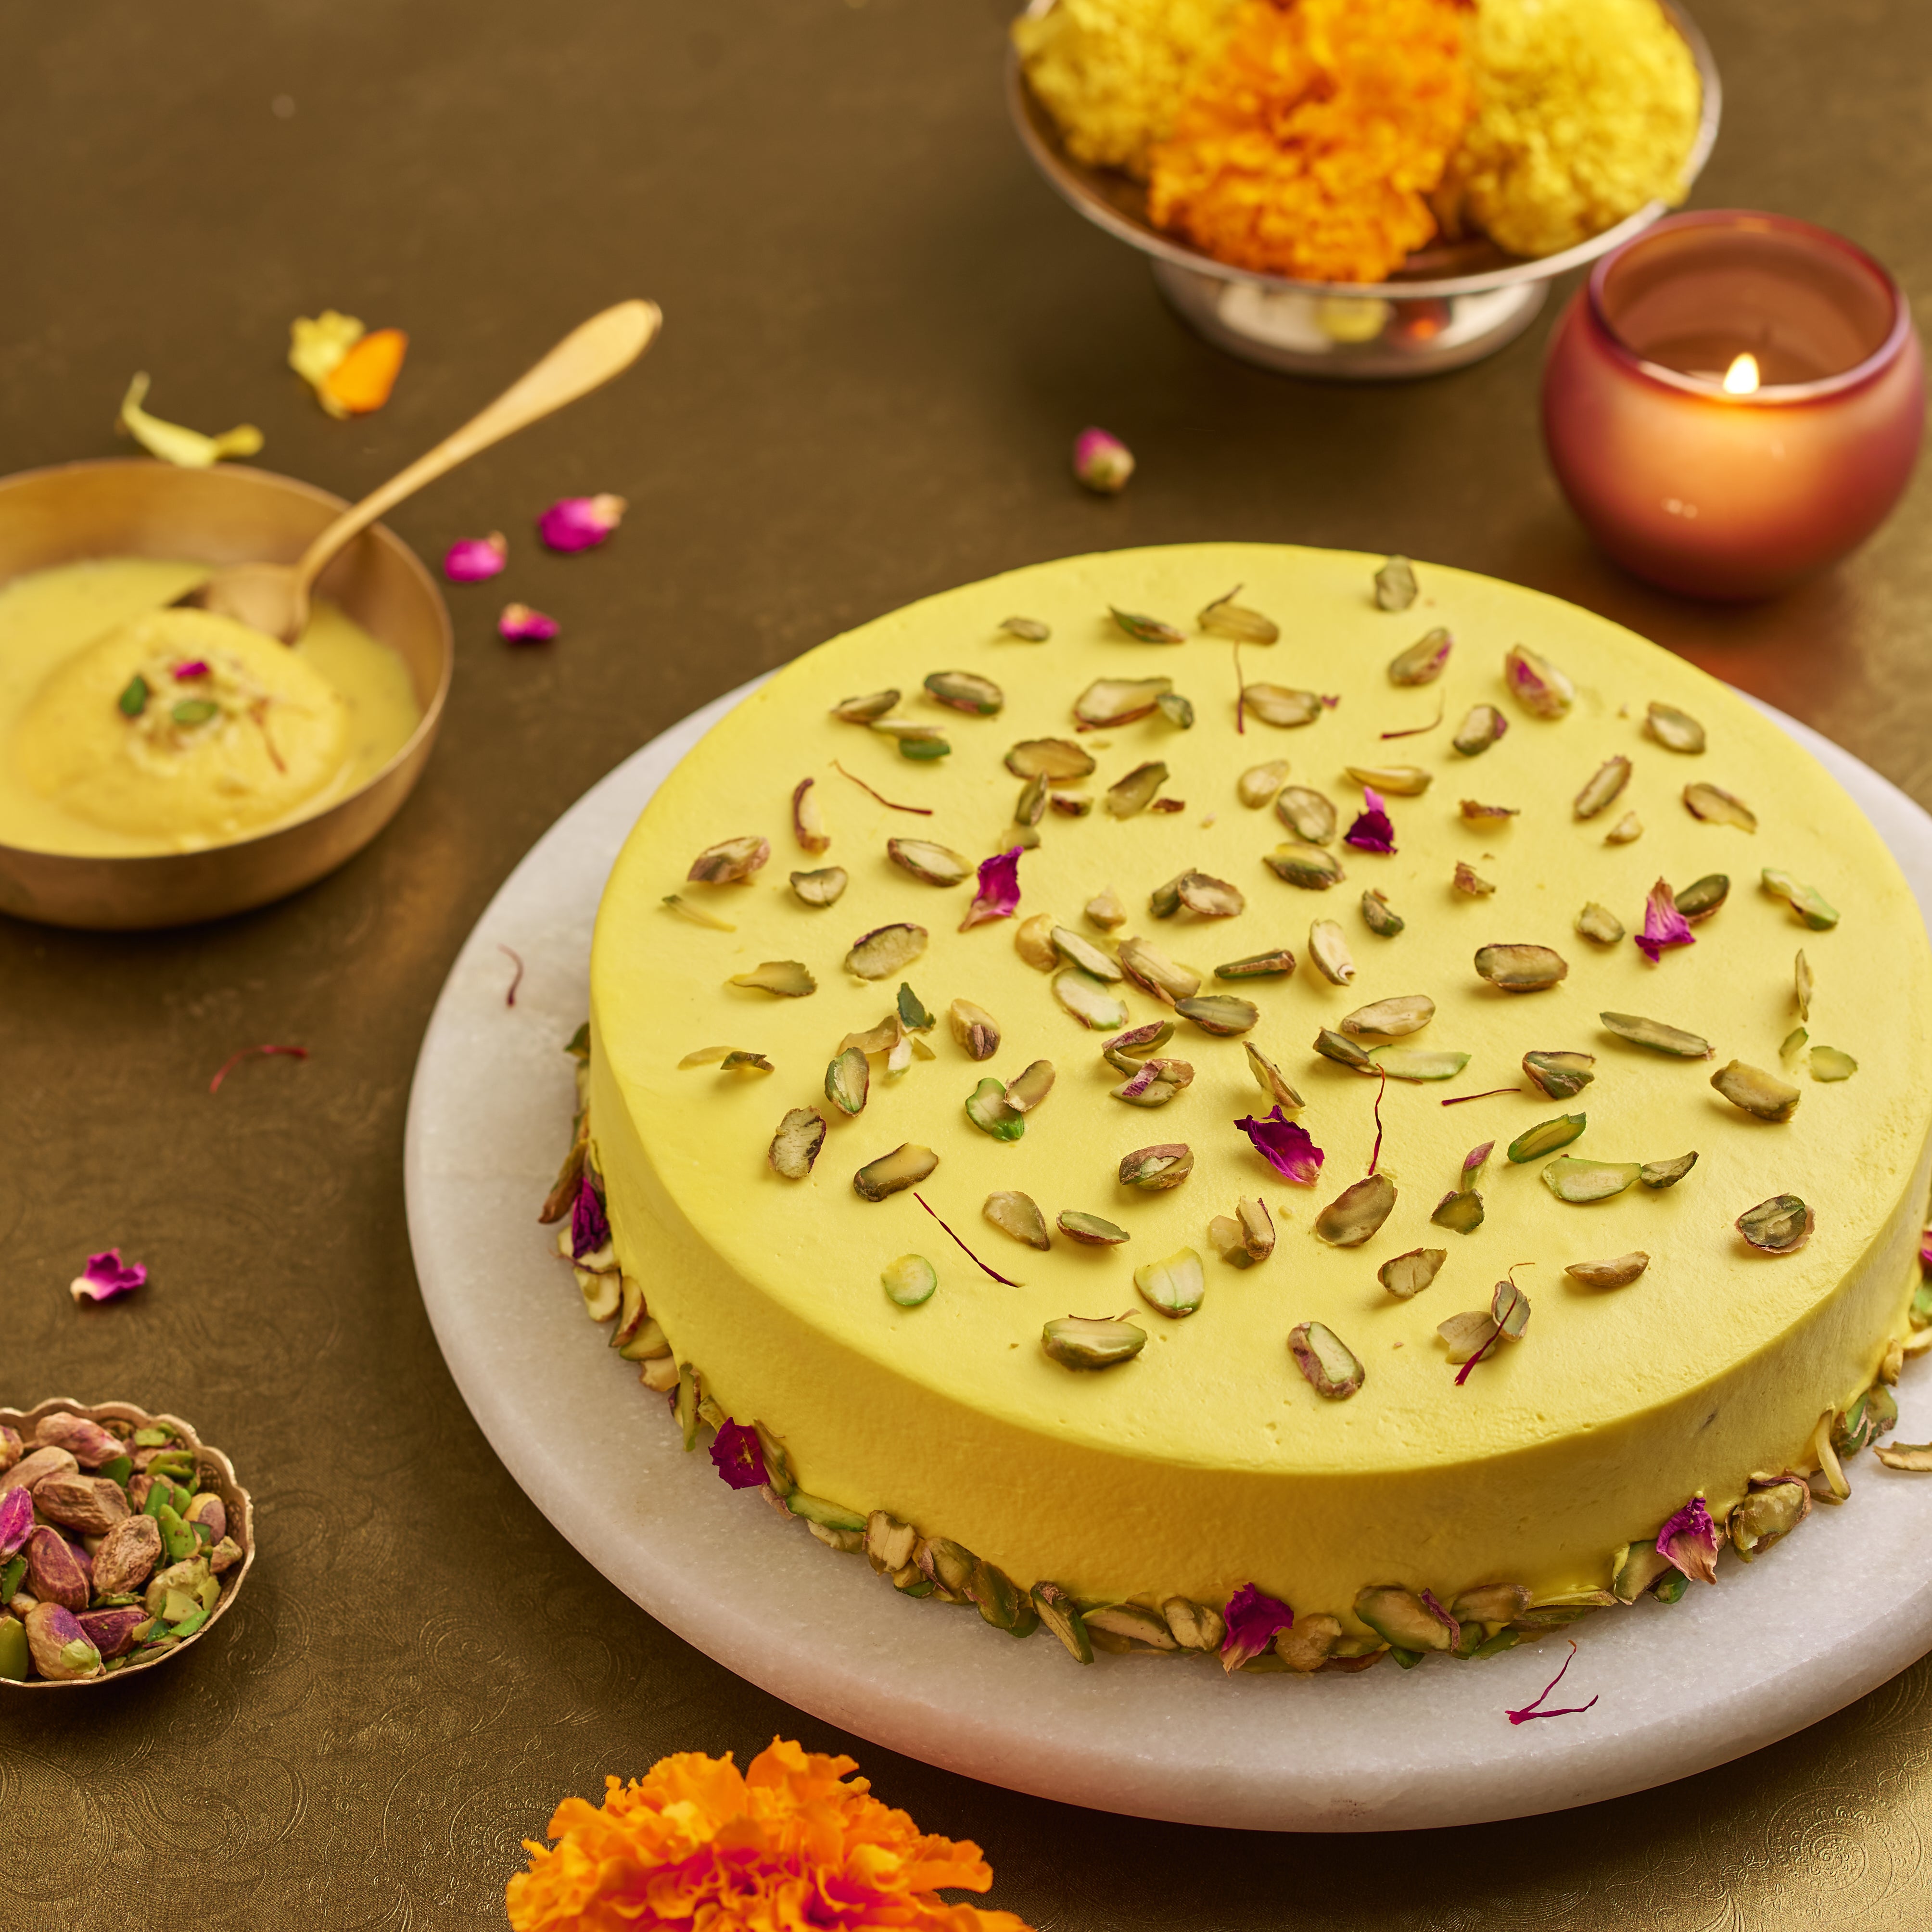 Online Cake Delivery in India. Fresh Baked Cake @ Your Doorstep